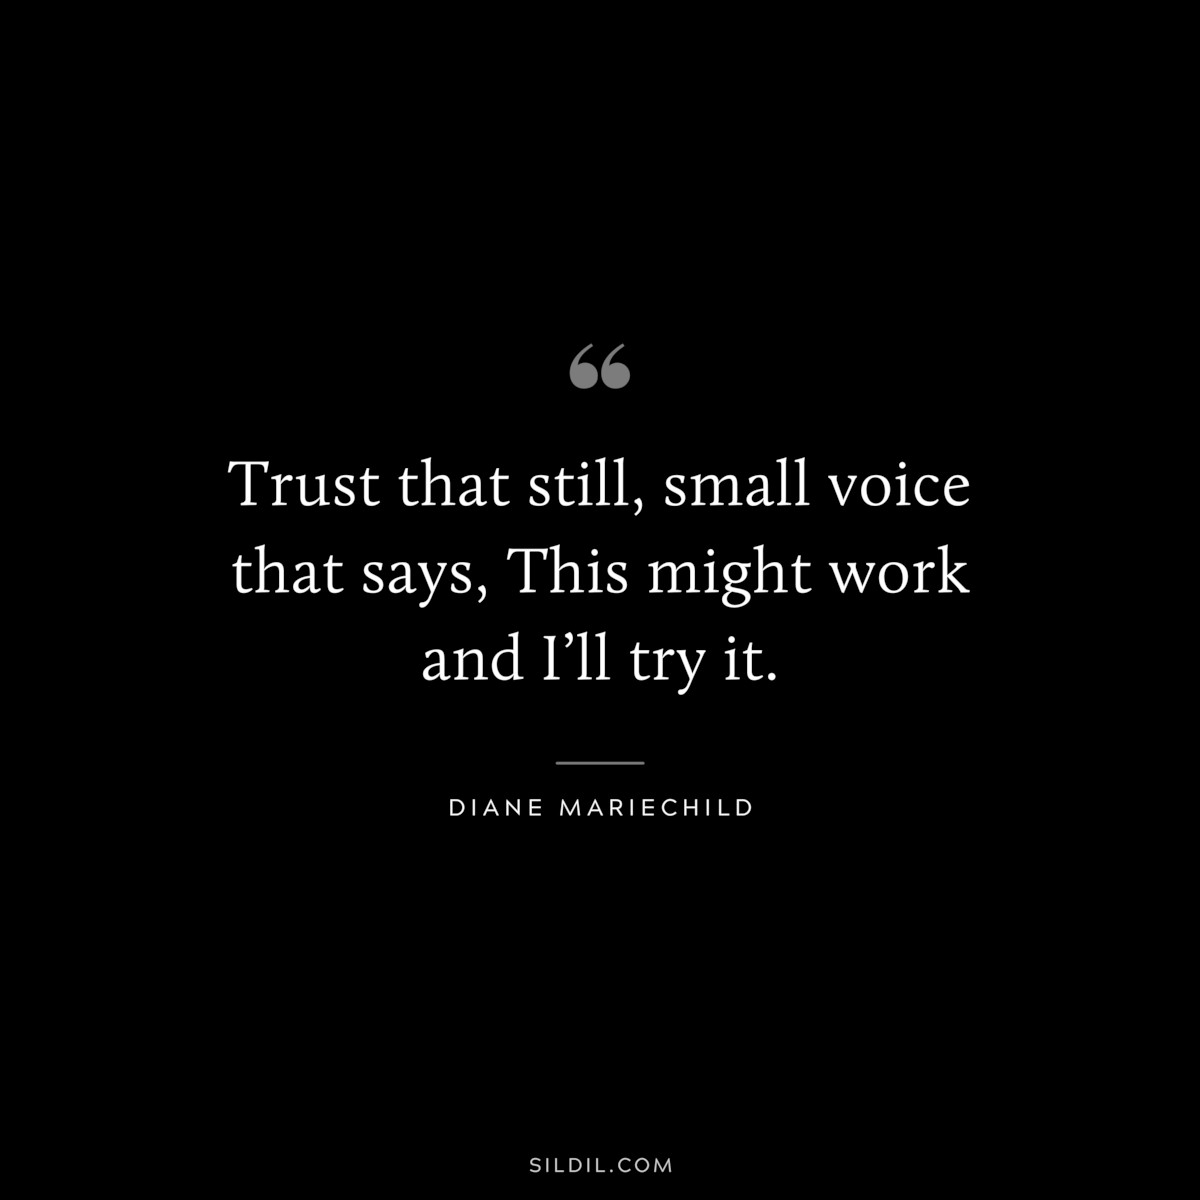 Trust that still, small voice that says, This might work and I’ll try it. ― Diane Mariechild